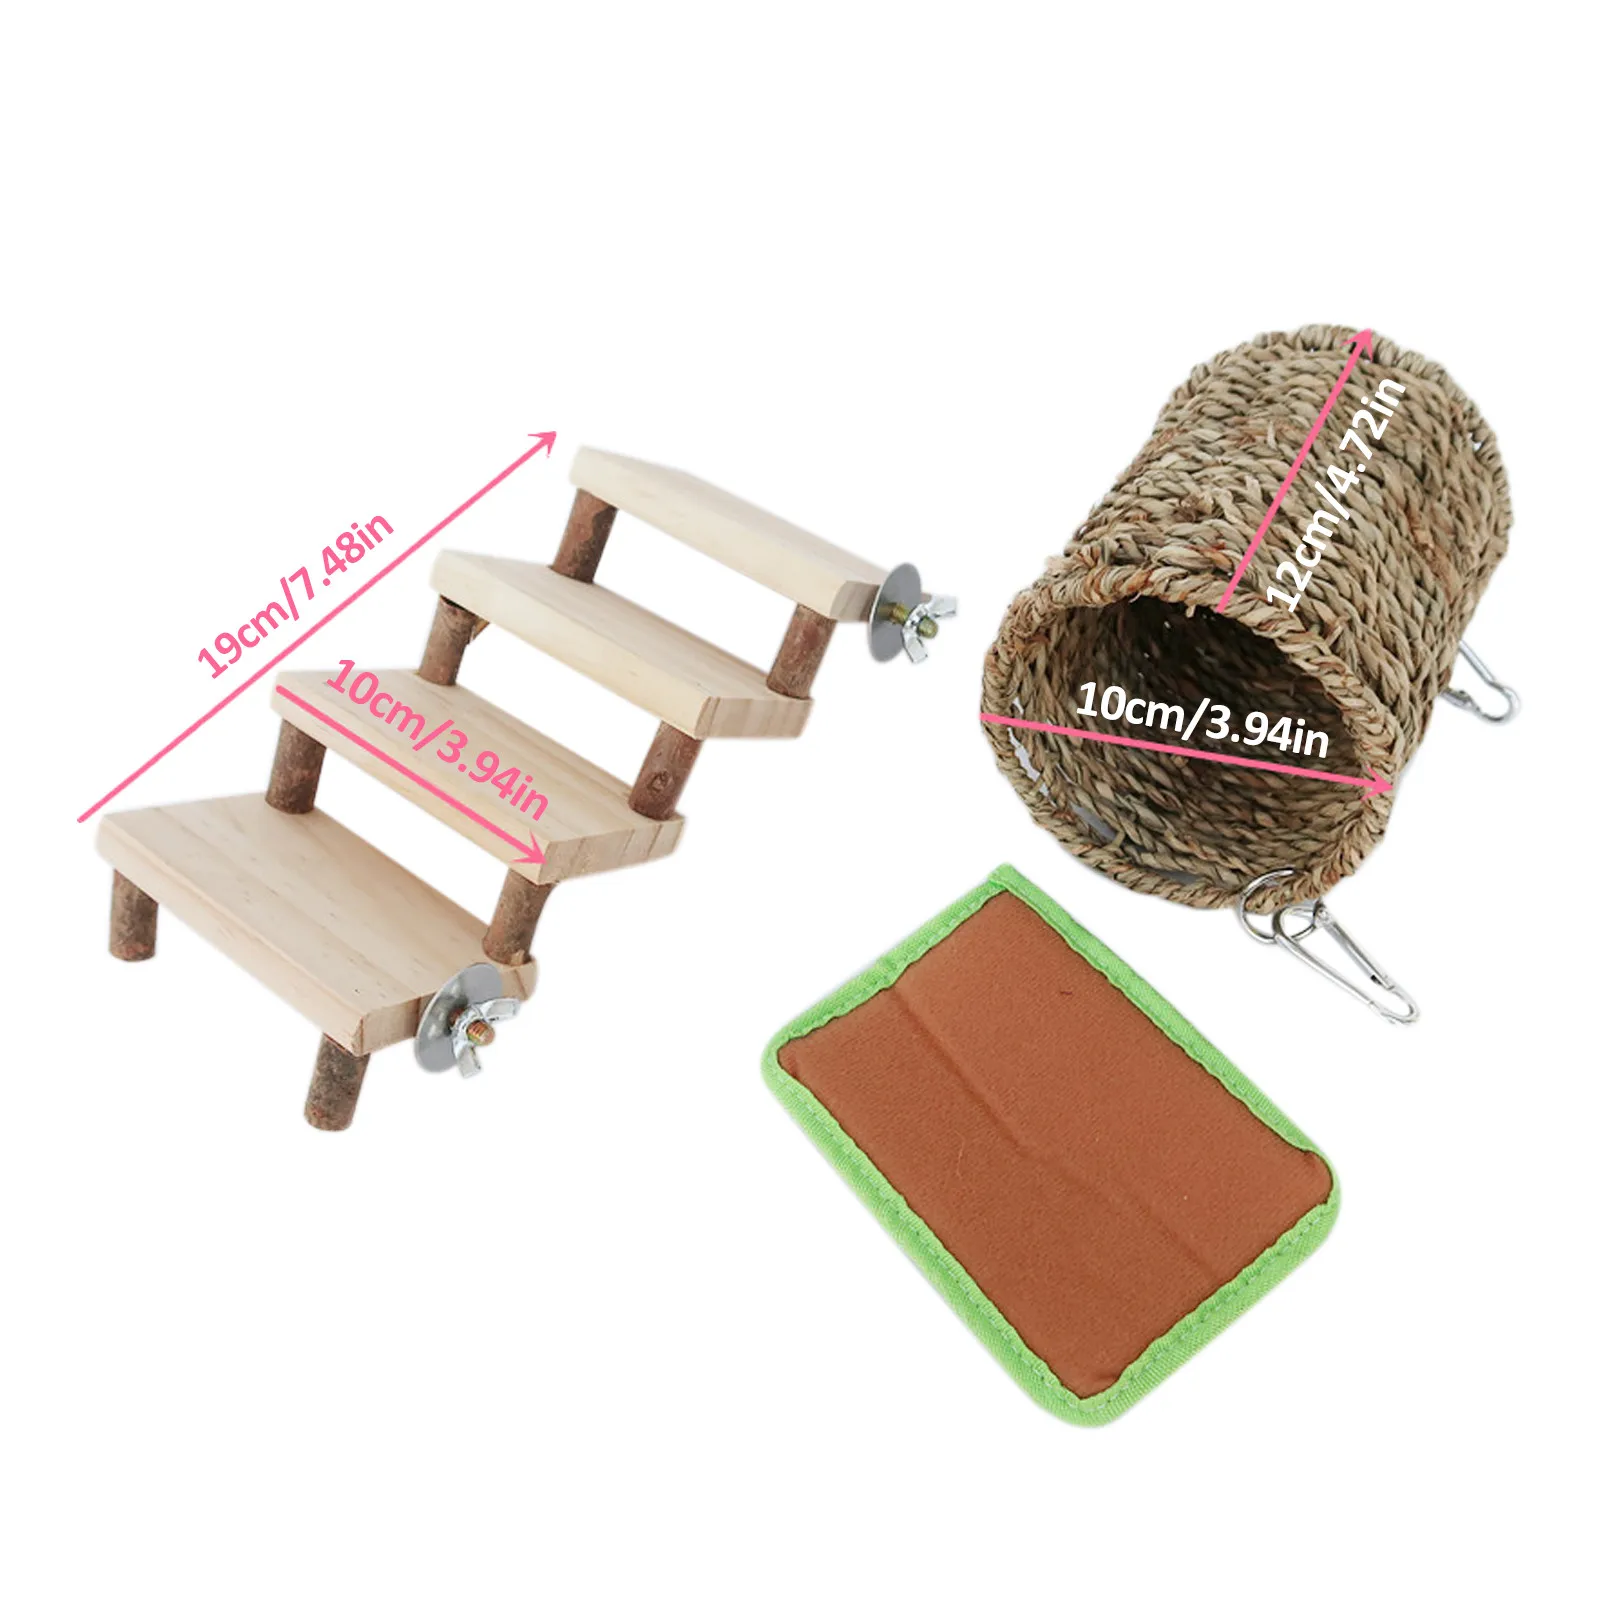 

Hamster Squirrel Stairs Chew toys Warm Nest Drill barrel Golden Bear Honey Bag glider Guinea pig 2PC wooden molar toy